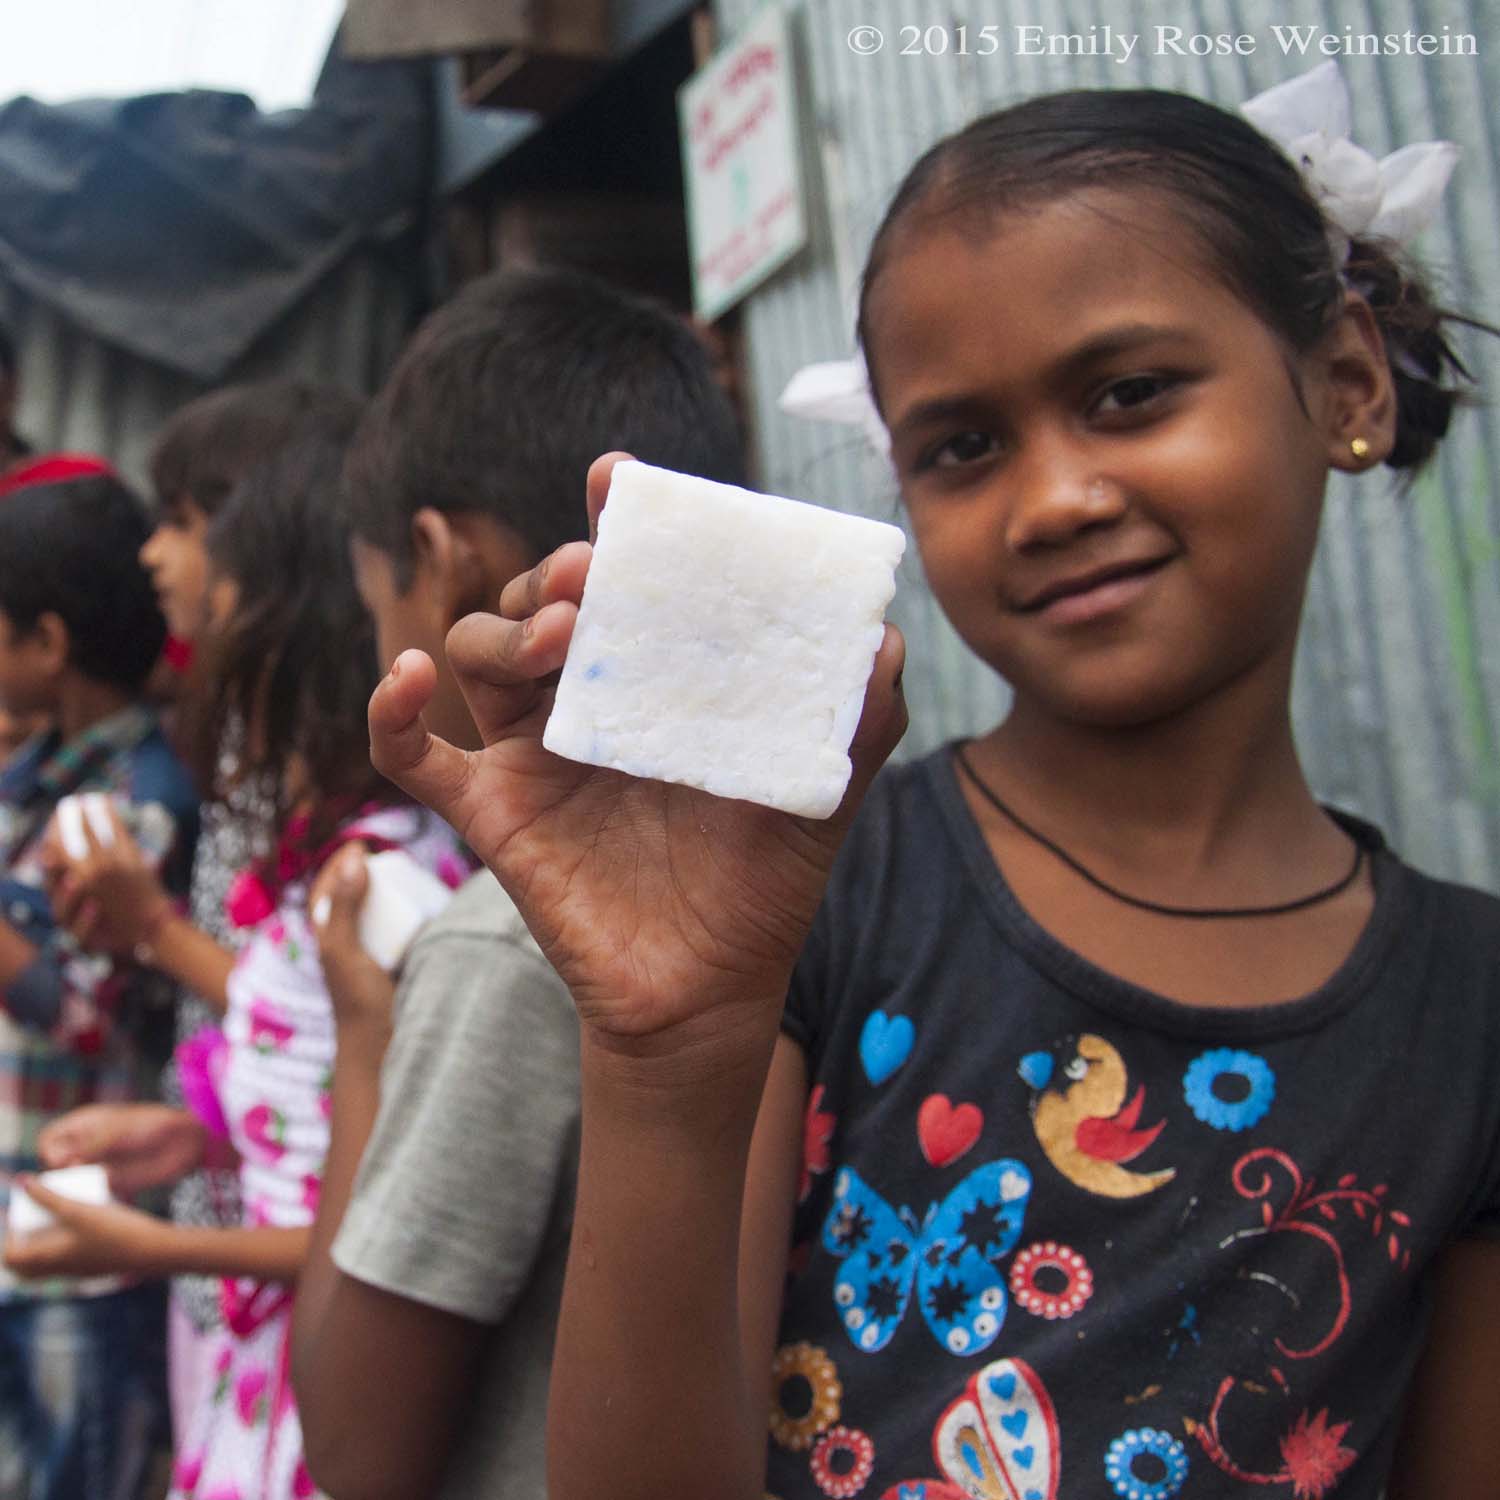 Recycled soap can help clean hands and save lives.